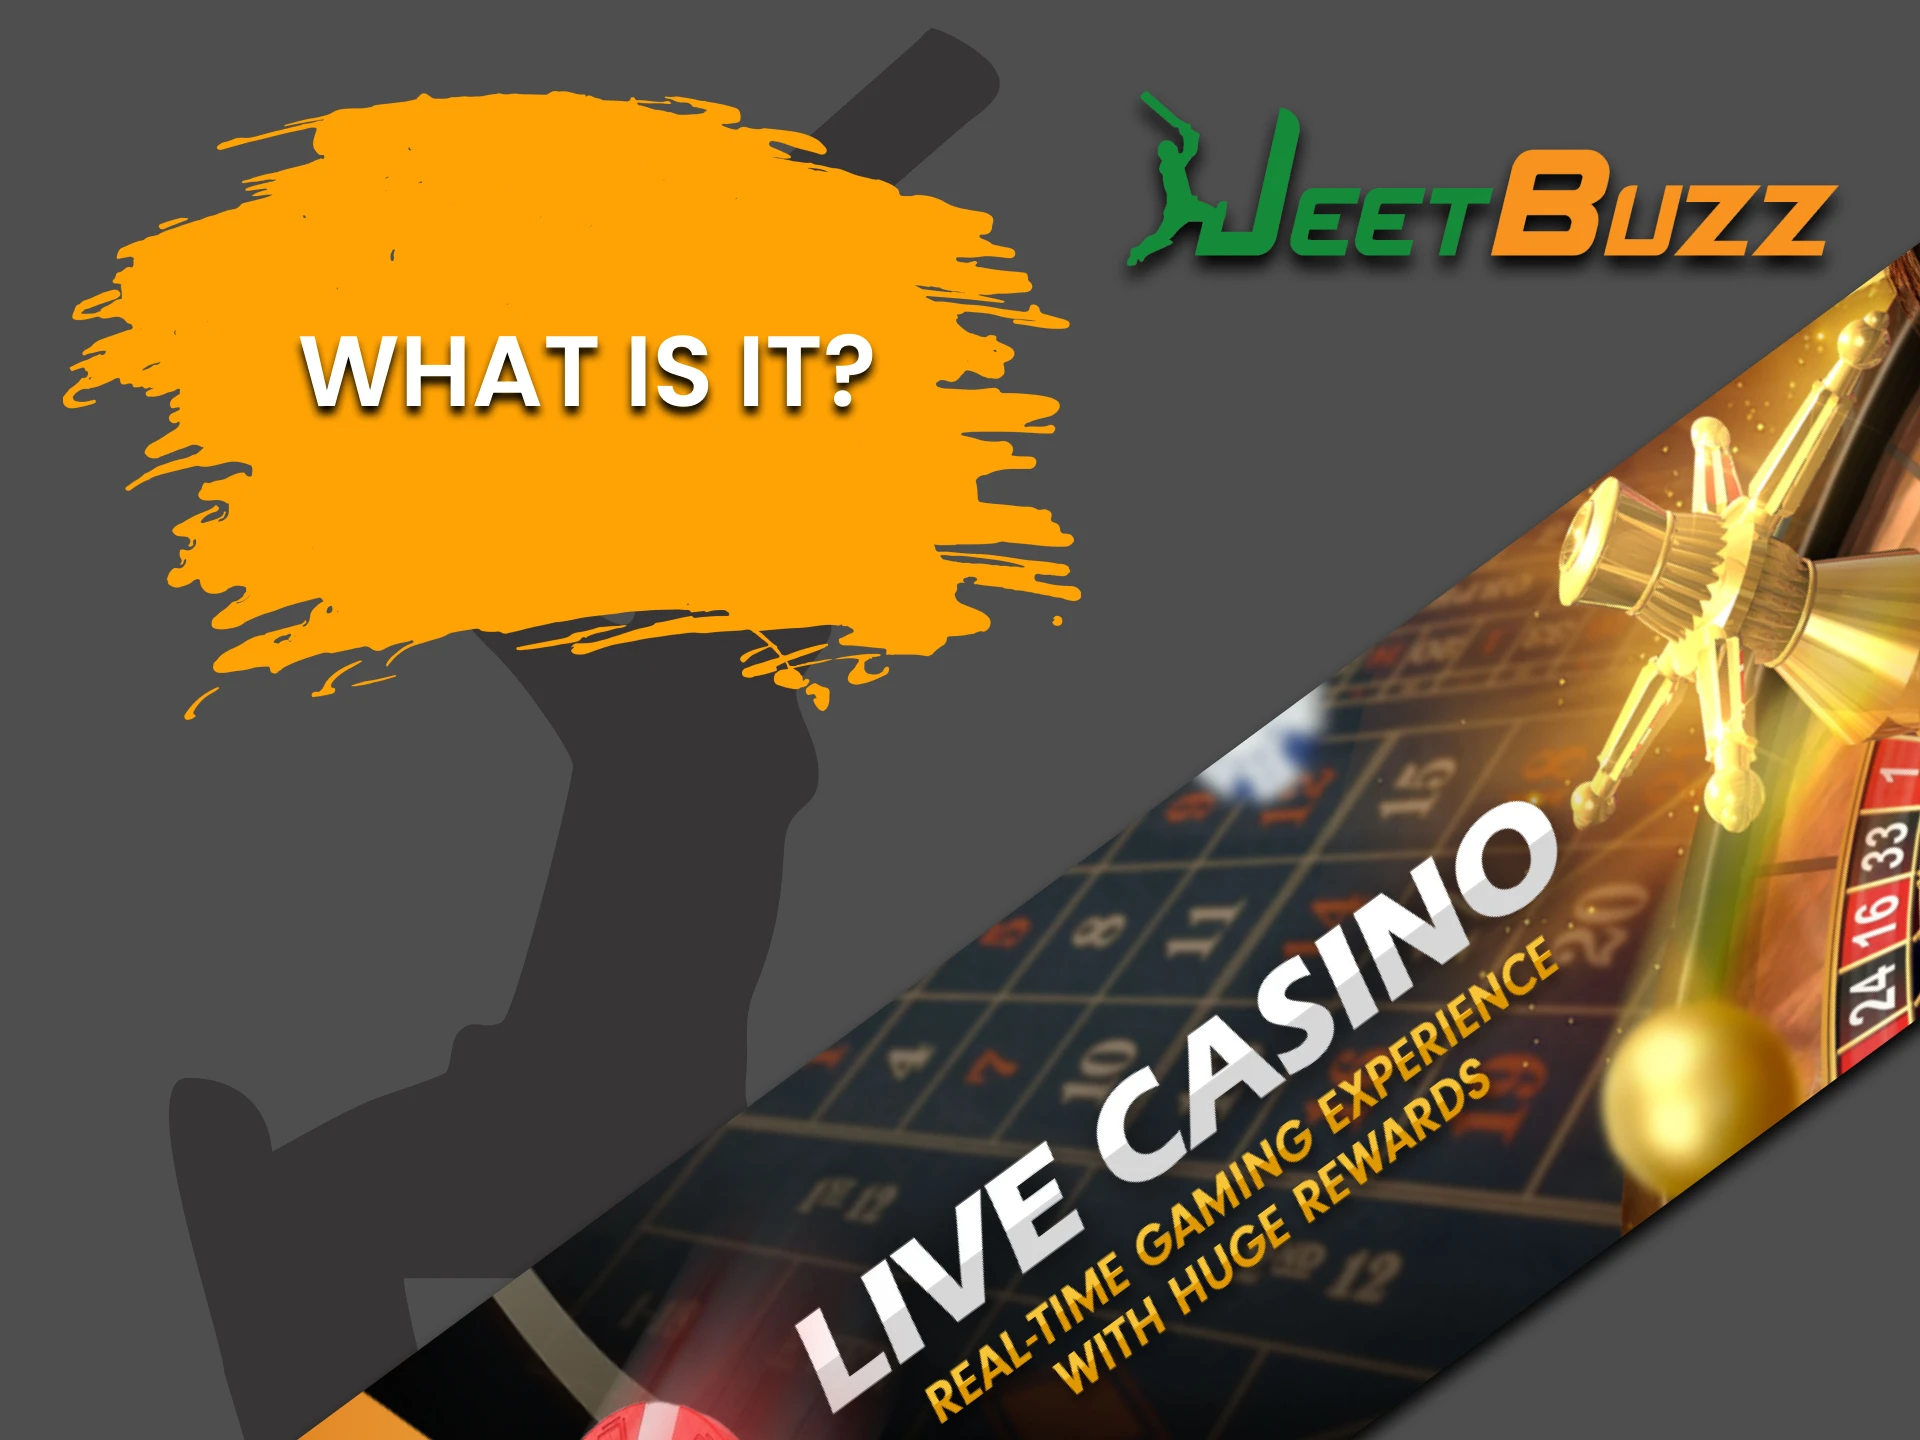 We will tell you everything about the live casino on JeetBuzz.